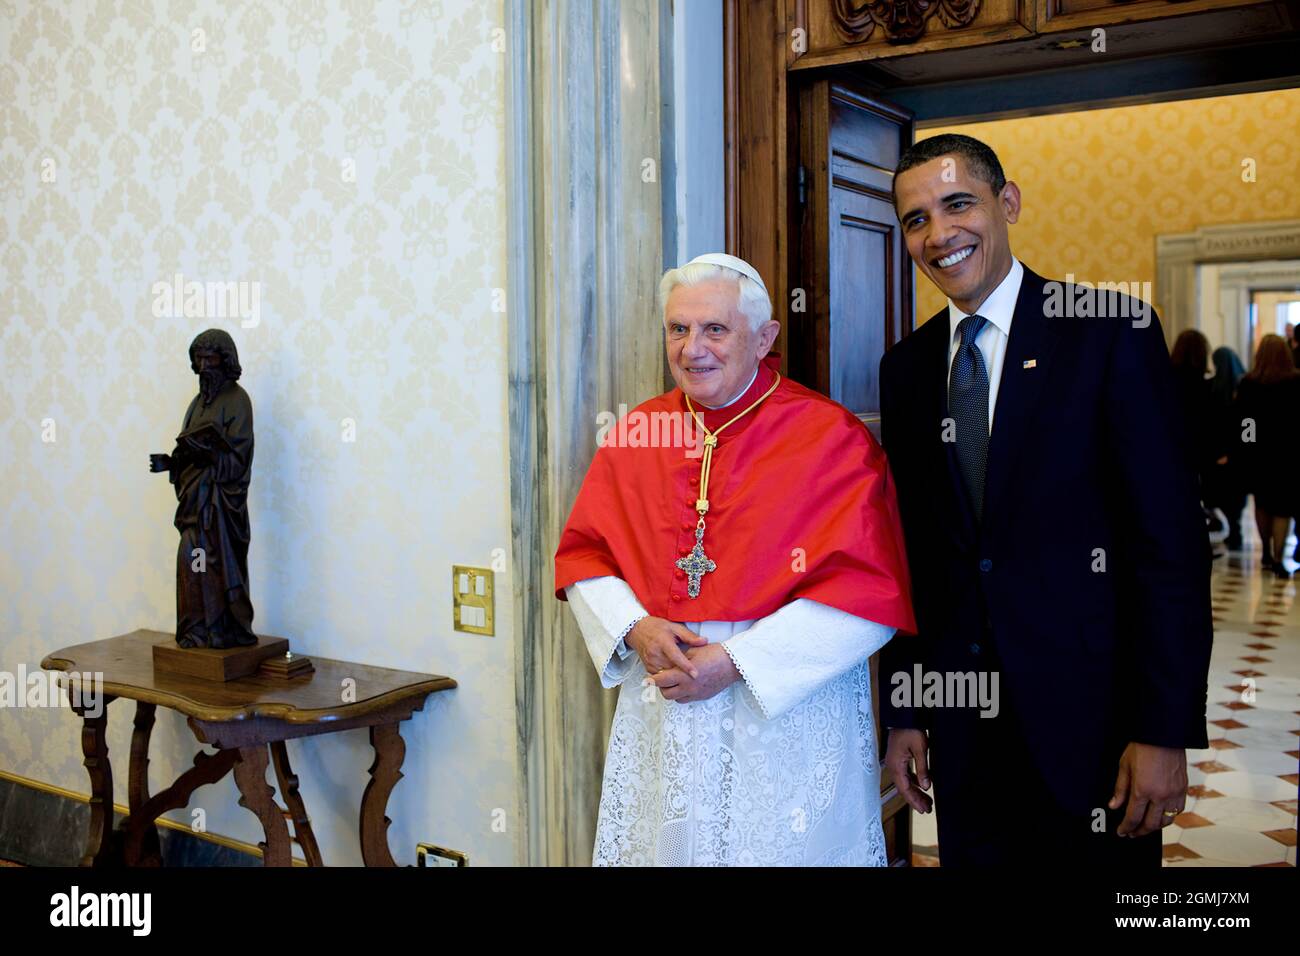 President Barack Obama meets with Pope Benedict XVI at the Vatican on July 10, 2009.(Official White House photo by Pete Souza)  This official White House photograph is being made available for publication by news organizations and/or for personal use printing by the subject(s) of the photograph. The photograph may not be manipulated in any way or used in materials, advertisements, products, or promotions that in any way suggest approval or endorsement of the President, the First Family, or the White House. Stock Photo